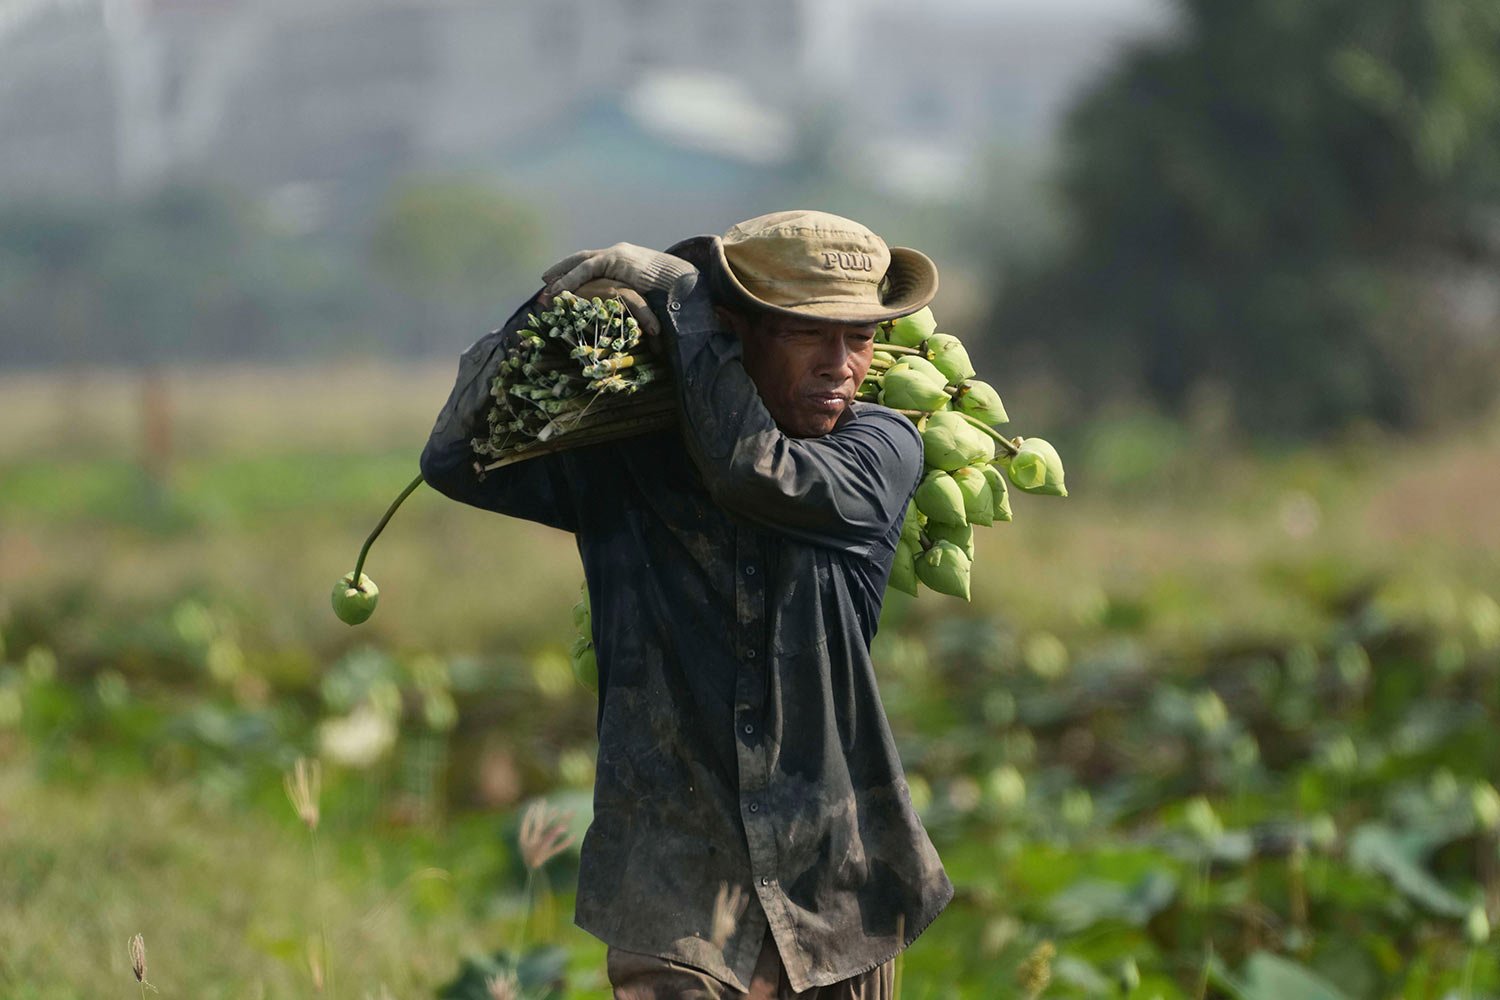  A farmer collects lotus flowers to sell in the market in Anlong Kgnan village, on the outskirts of Phnom Penh, Cambodia, Thursday, March 3, 2022. (AP Photo/Heng Sinith) 